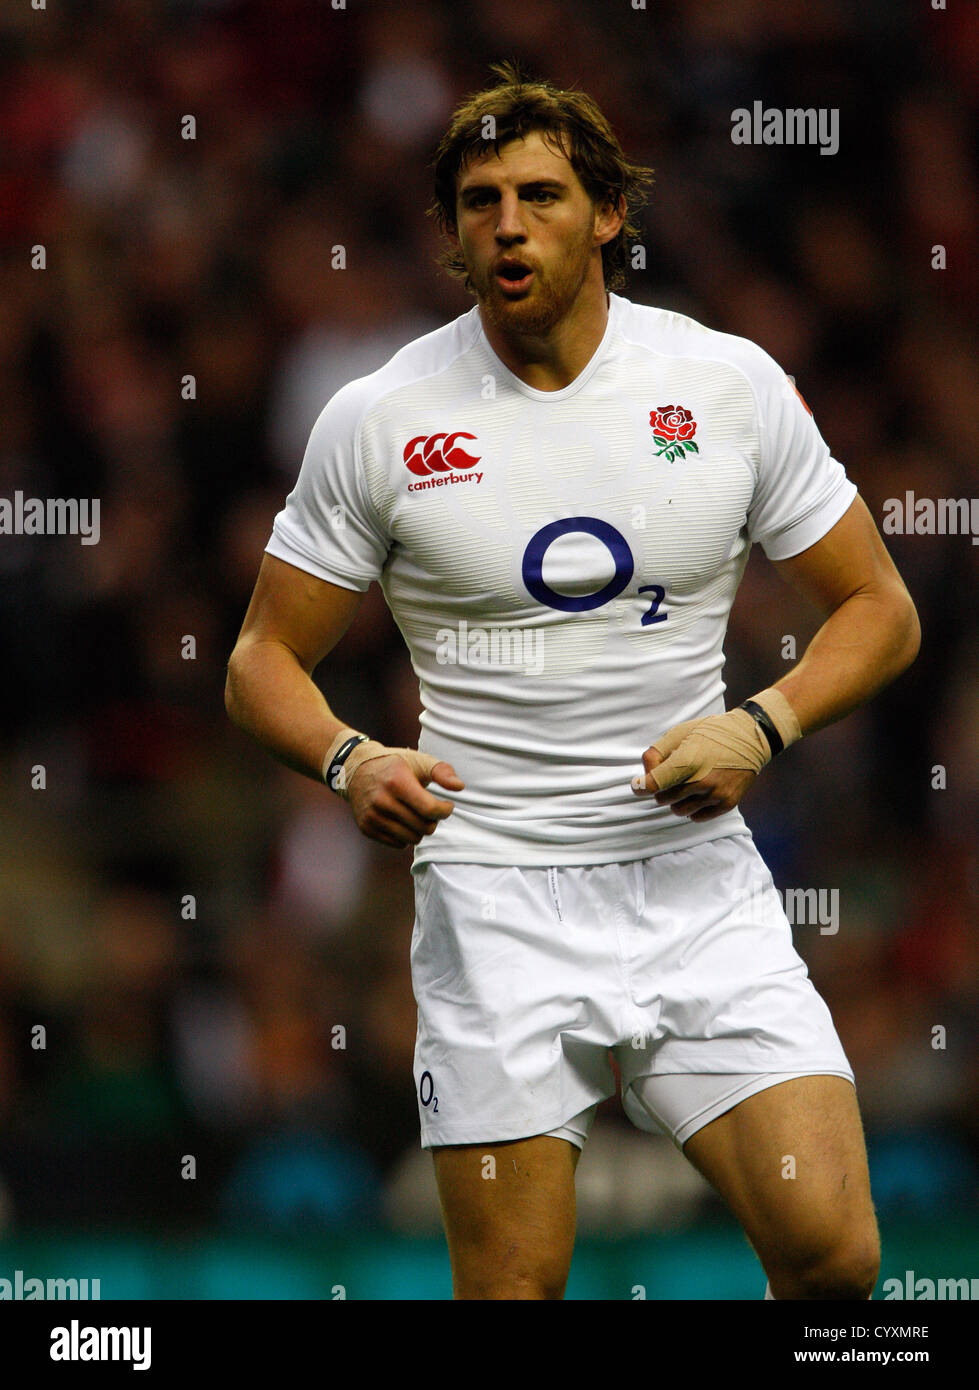 TOM WOOD ANGLETERRE TWICKENHAM MIDDLESEX ANGLETERRE RU 10 Novembre 2012 Banque D'Images